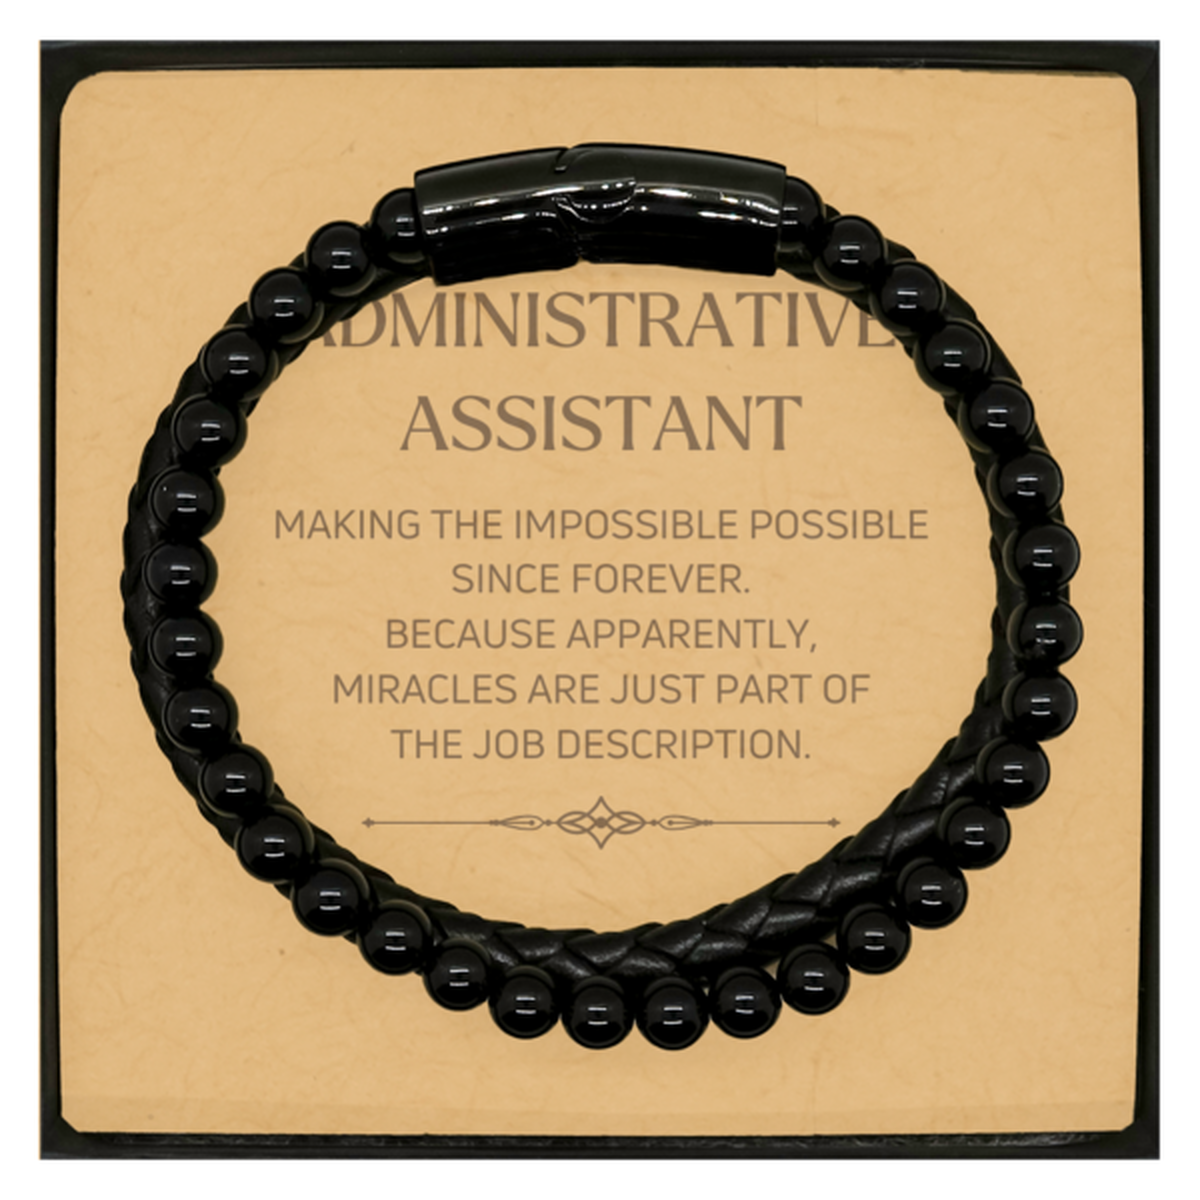 Funny Administrative Assistant Gifts, Miracles are just part of the job description, Inspirational Birthday Christmas Stone Leather Bracelets For Administrative Assistant, Men, Women, Coworkers, Friends, Boss